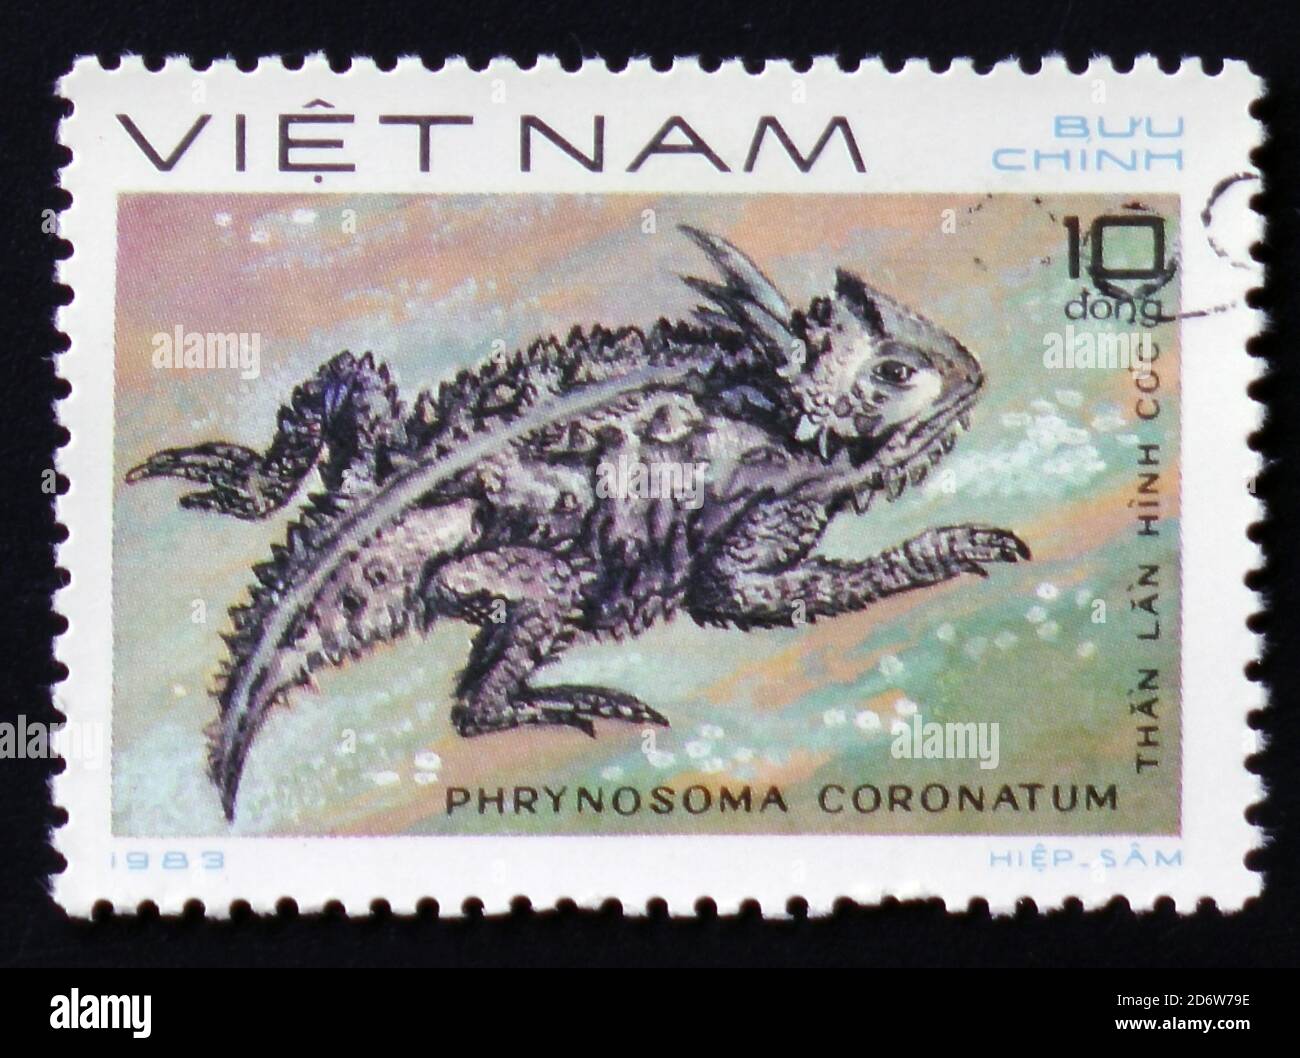 MOSCOW, RUSSIA - FEBRUARY 12, 2017: A Stamp printed in VIETNAM shows the image of a Coast Horned Lizard with the description 'Phrynosoma coronatum' fr Stock Photo